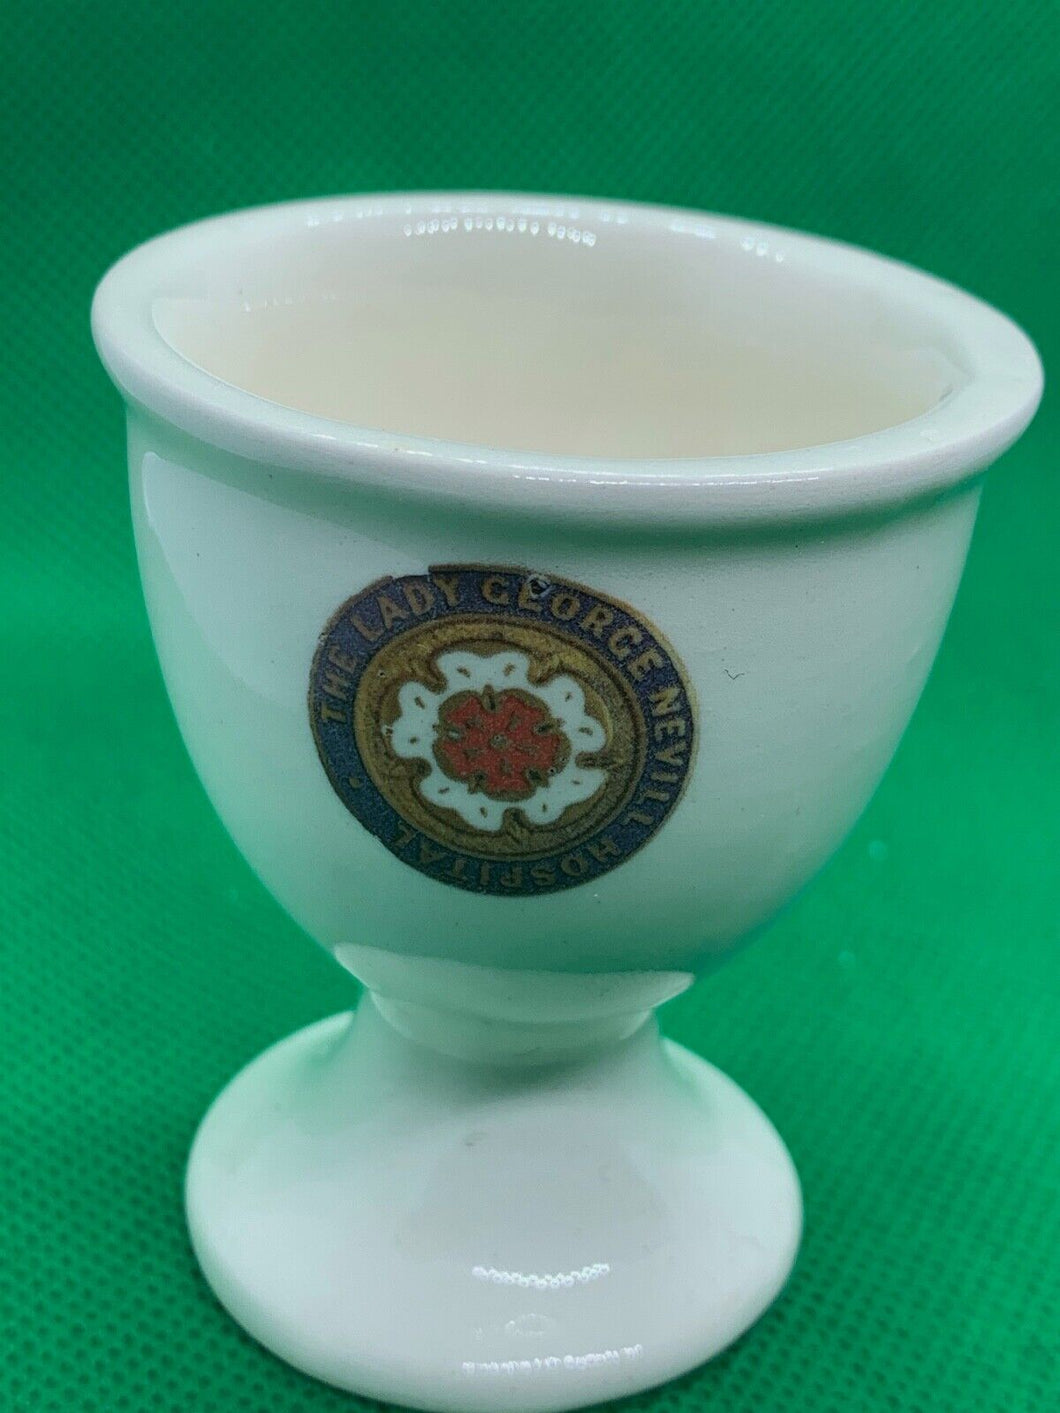 Badges of Empire Collectors Series Egg Cup - Lady George Hospital - No 186